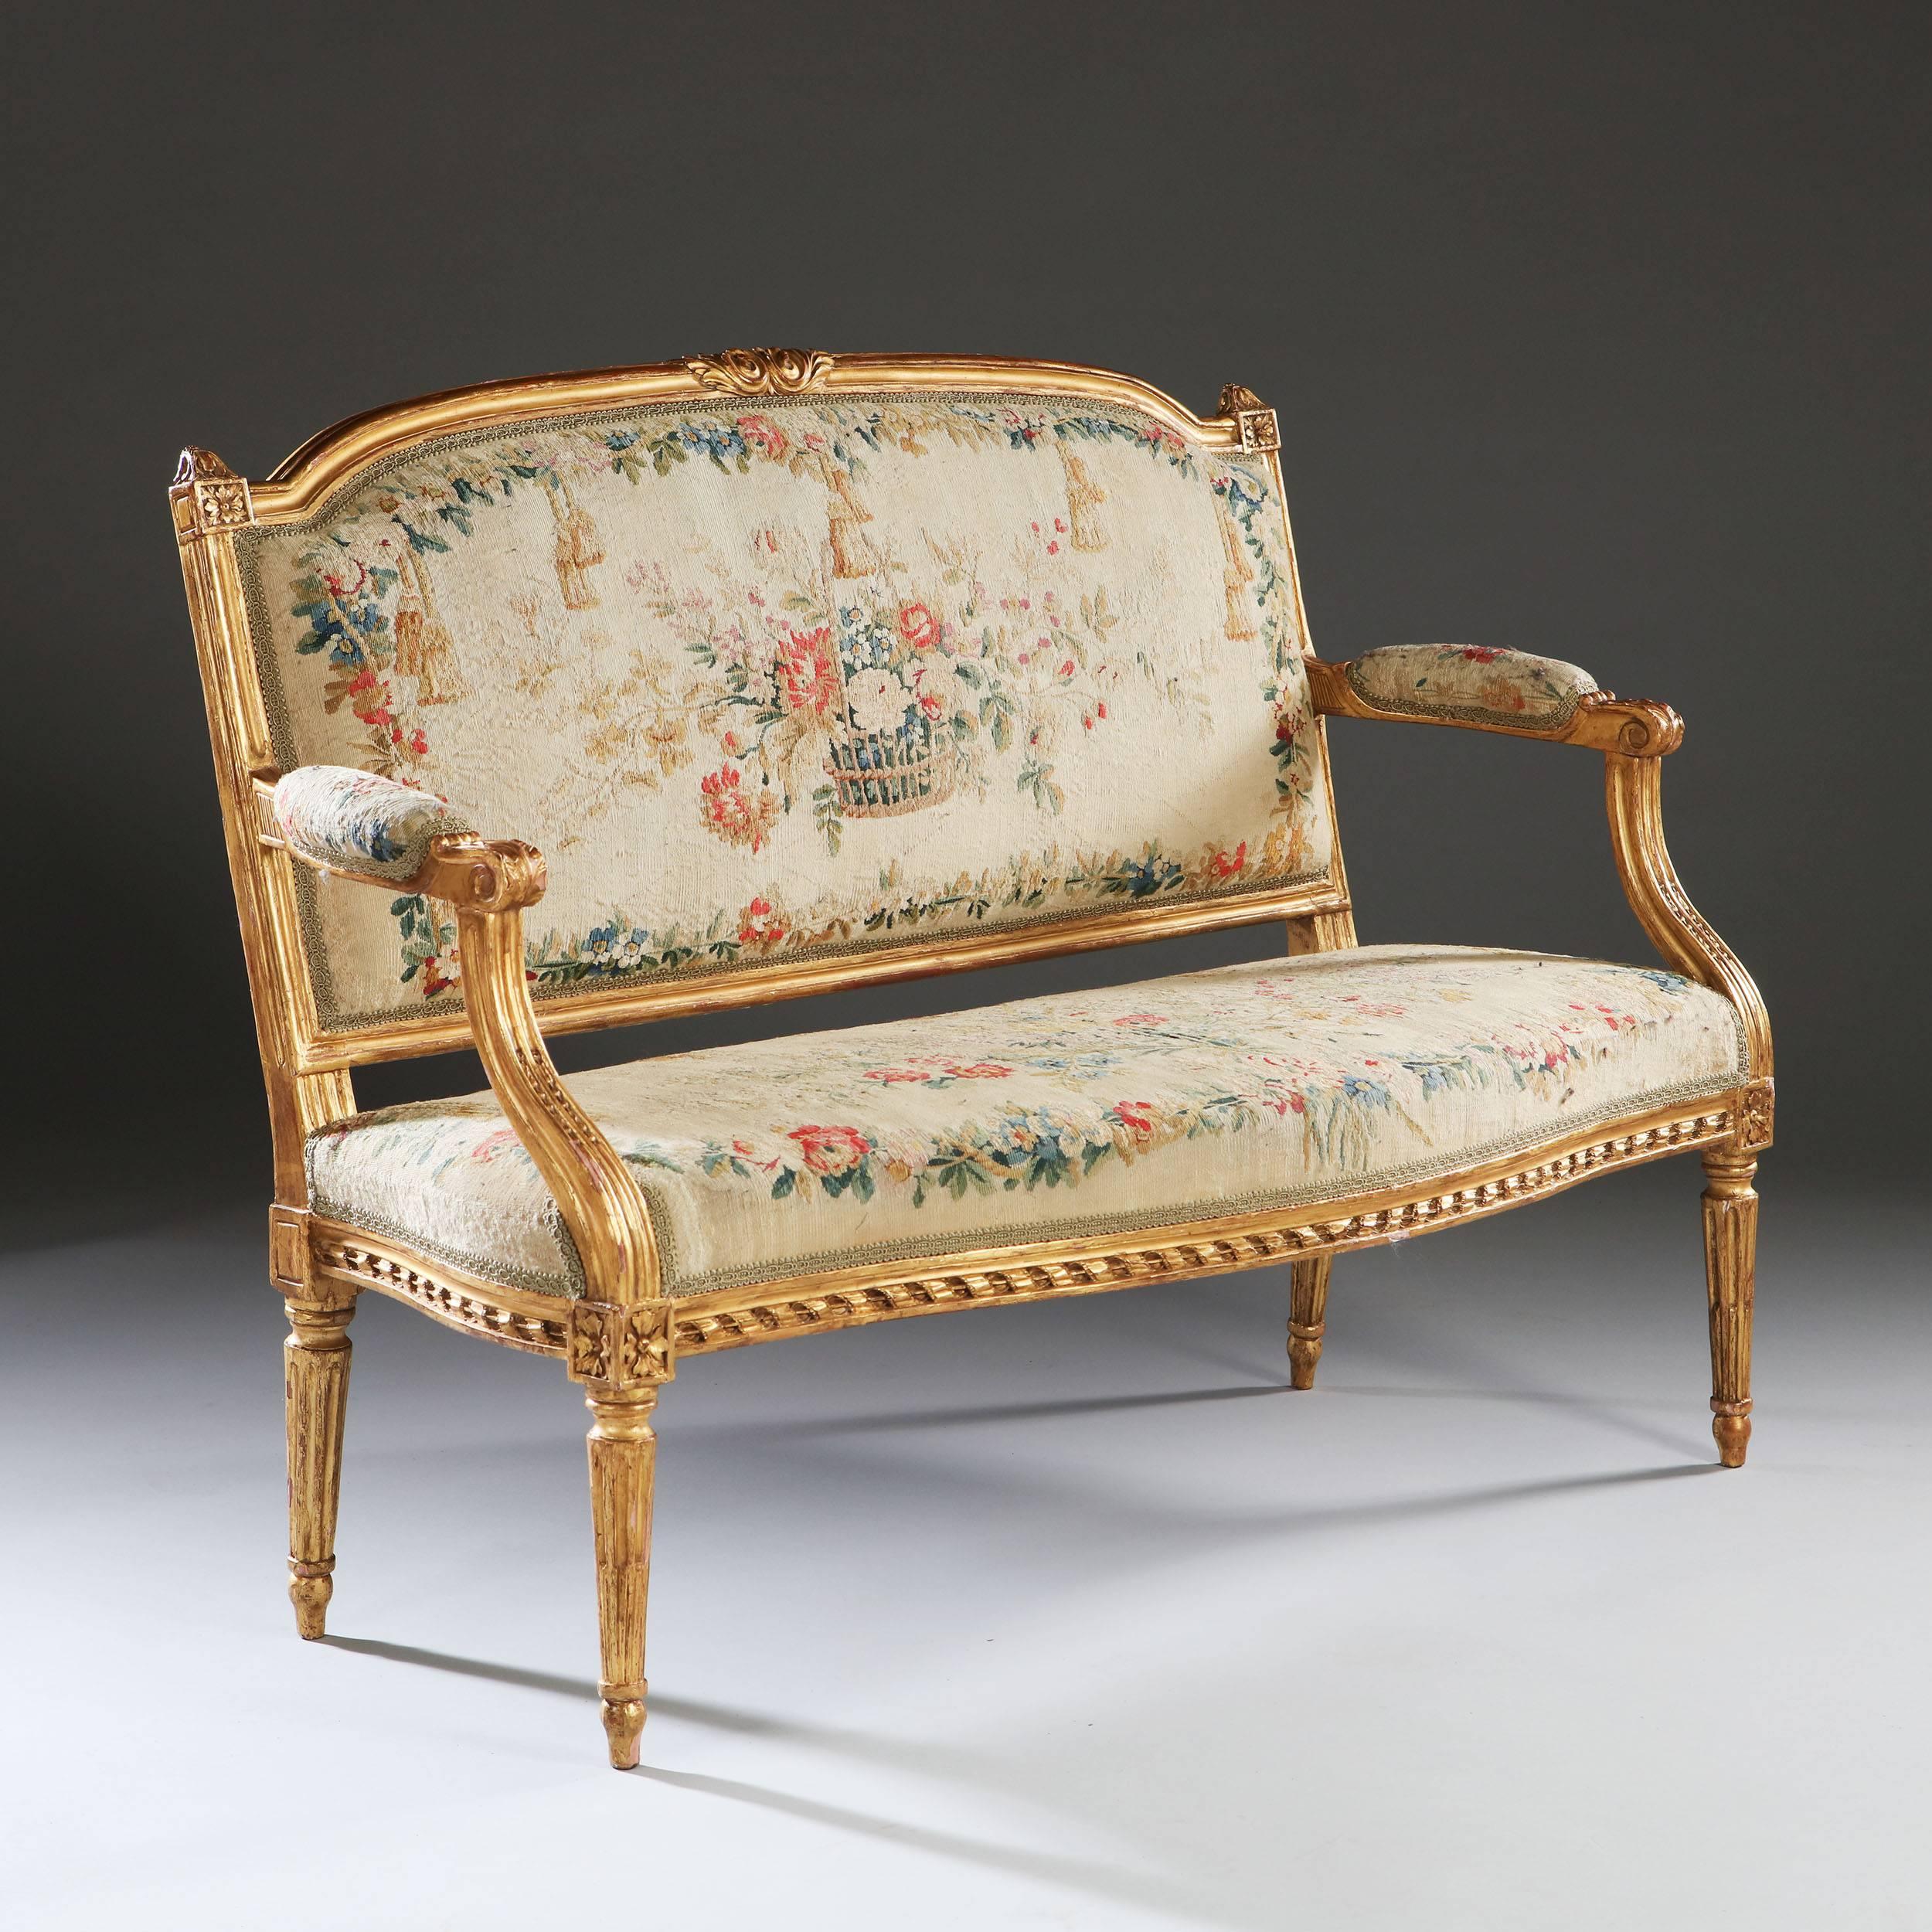 A very fine pair of late 18th century Louis XVI neoclassical marquise retaining their original petit point needlework upholstery. The frames with neoclassical carved details, the shaped back with outswept arms, the bowed front apron with overlapping